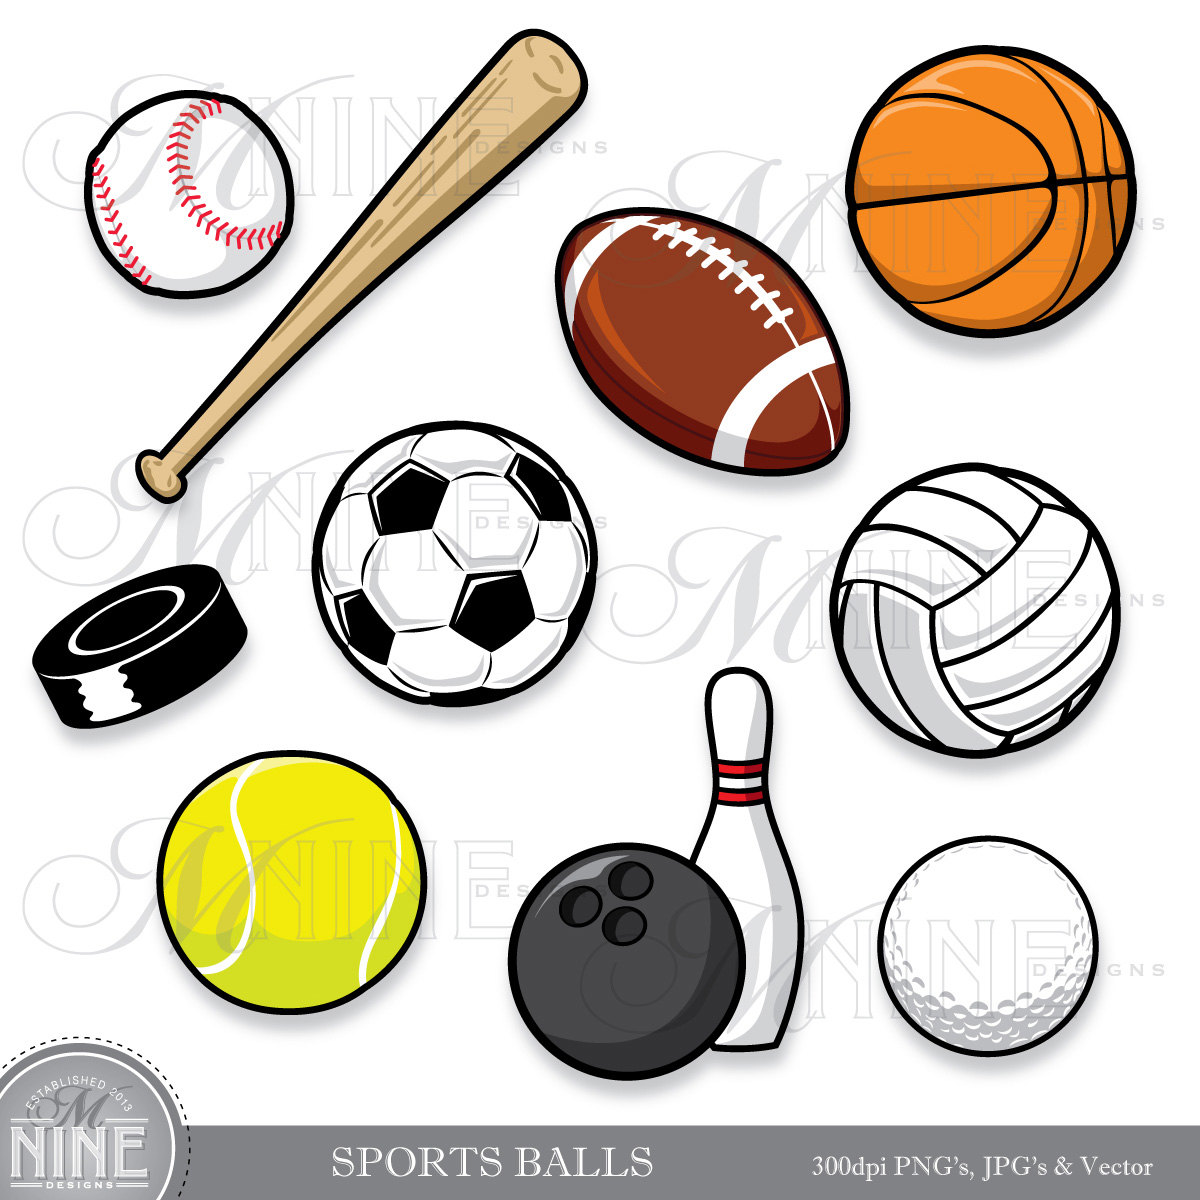 Free Sports Clipart just for 